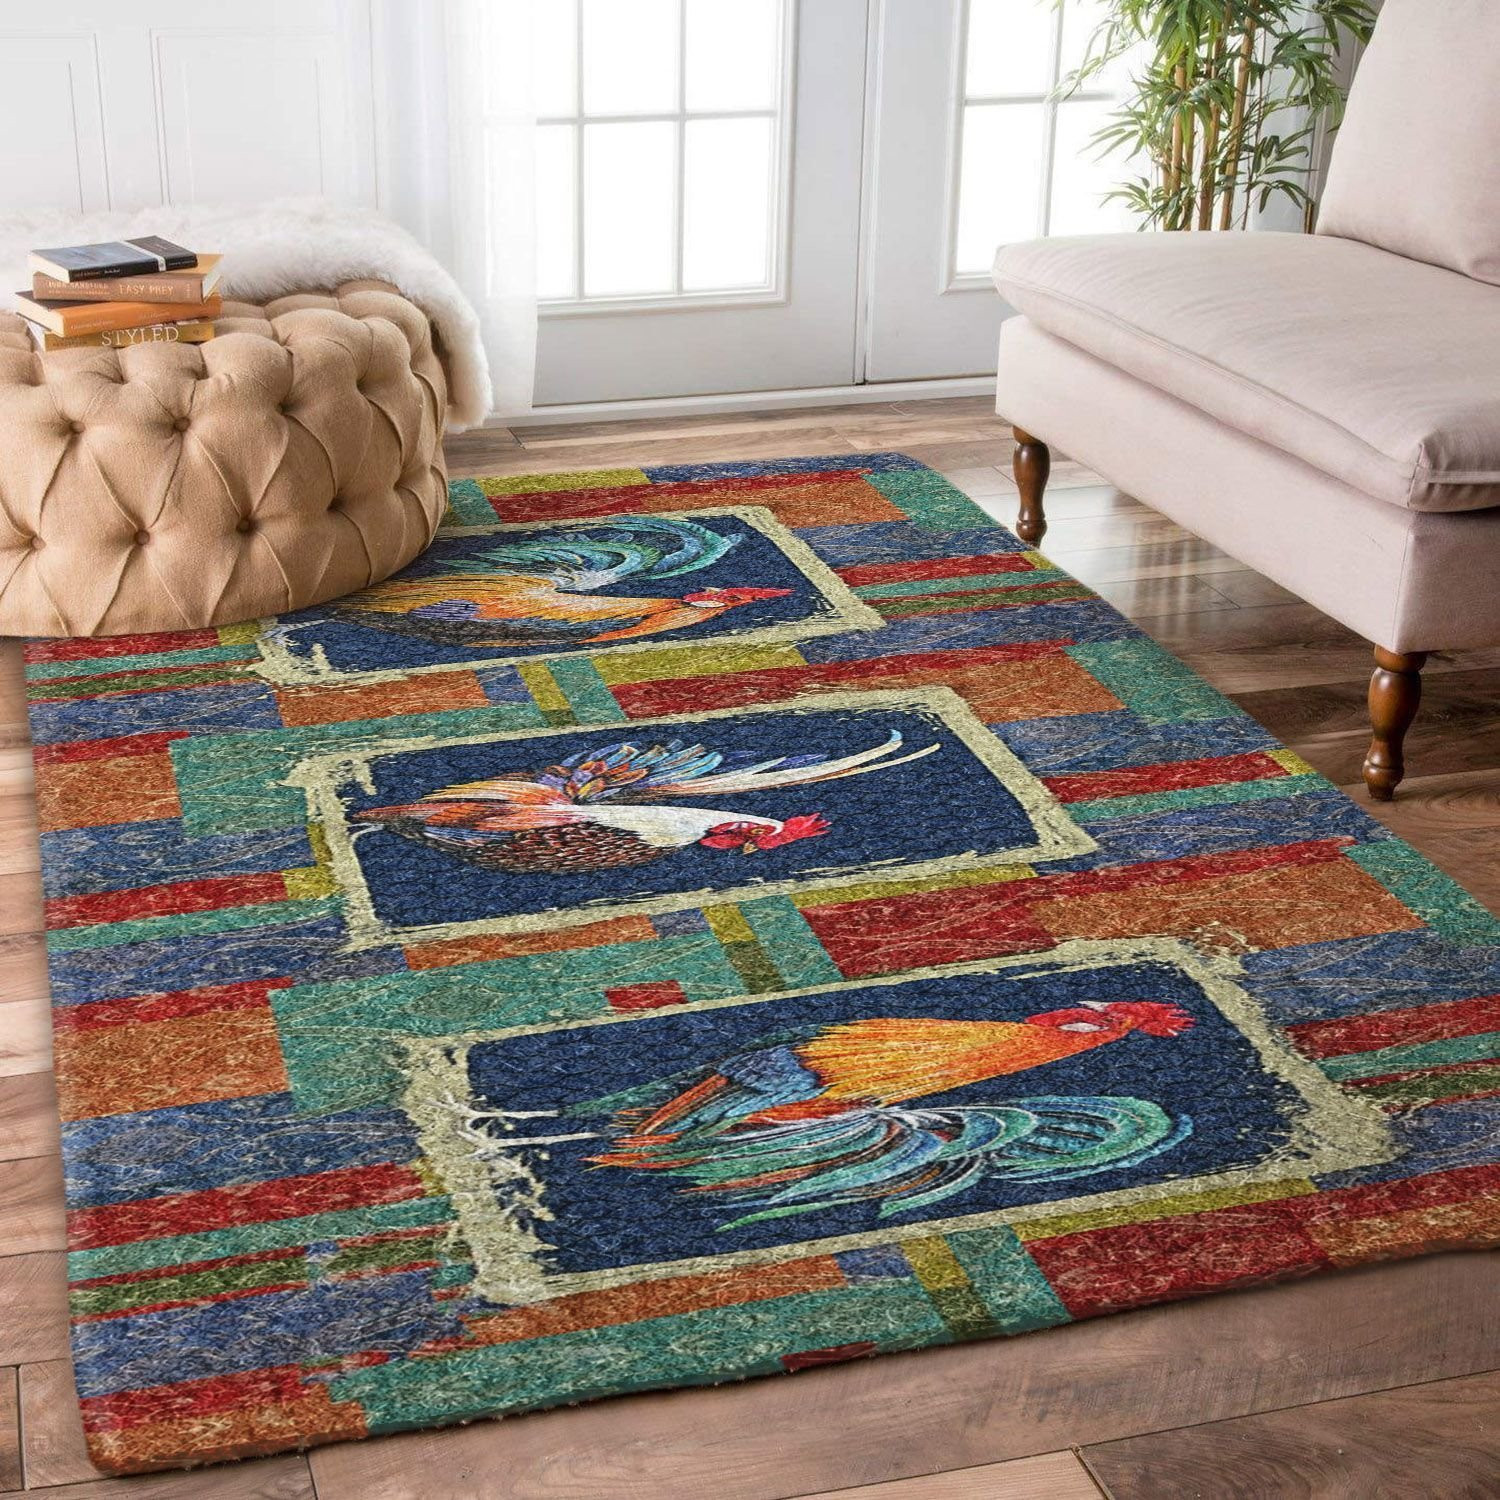 Damask Rooster Rugs Home Decor PAN